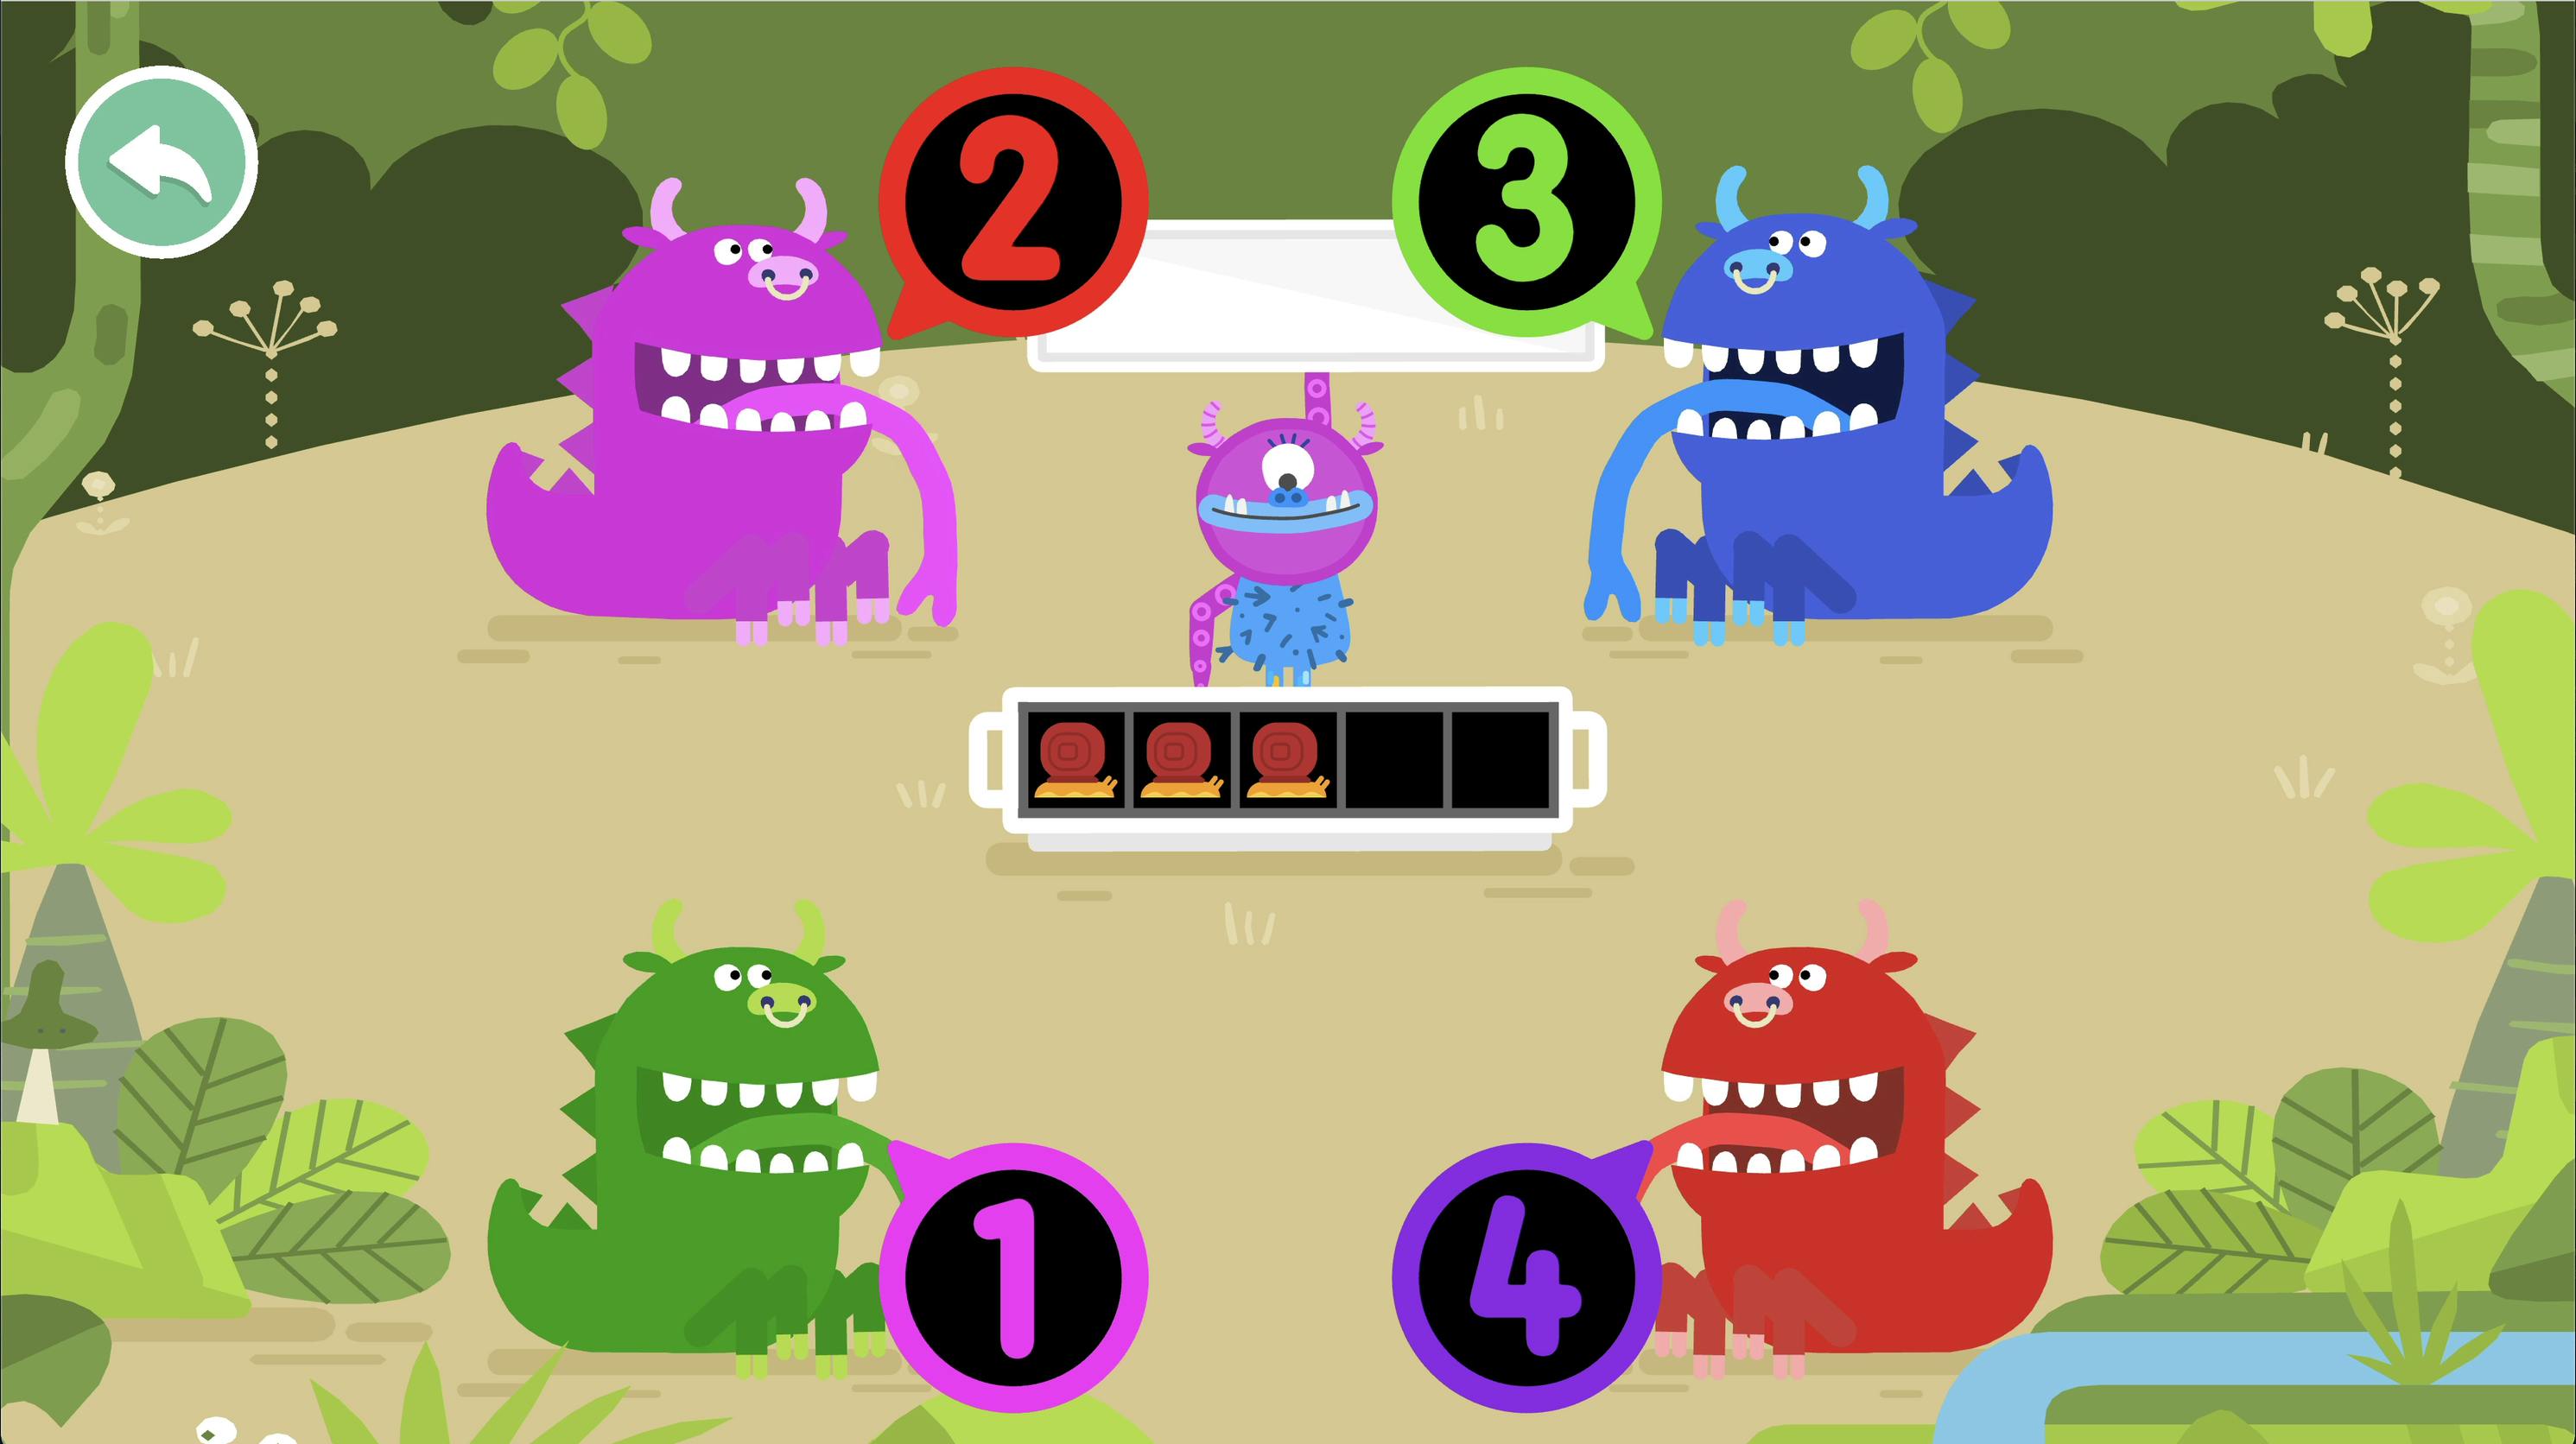 A screenshot from Teach Your Monster Number Skills - an educational app for kids.